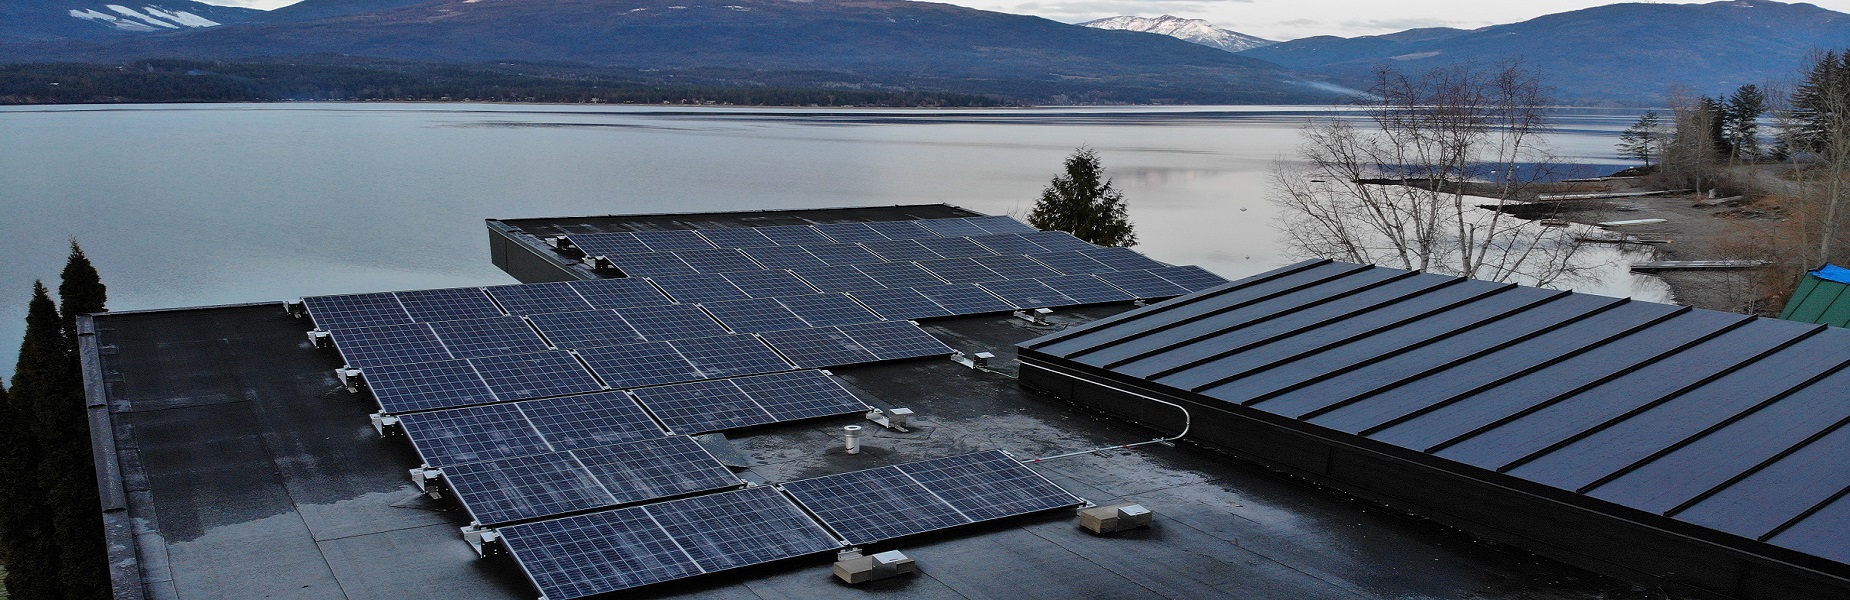 Okanagan Solar will help you save money and the environment at the same time through the use of solar power.